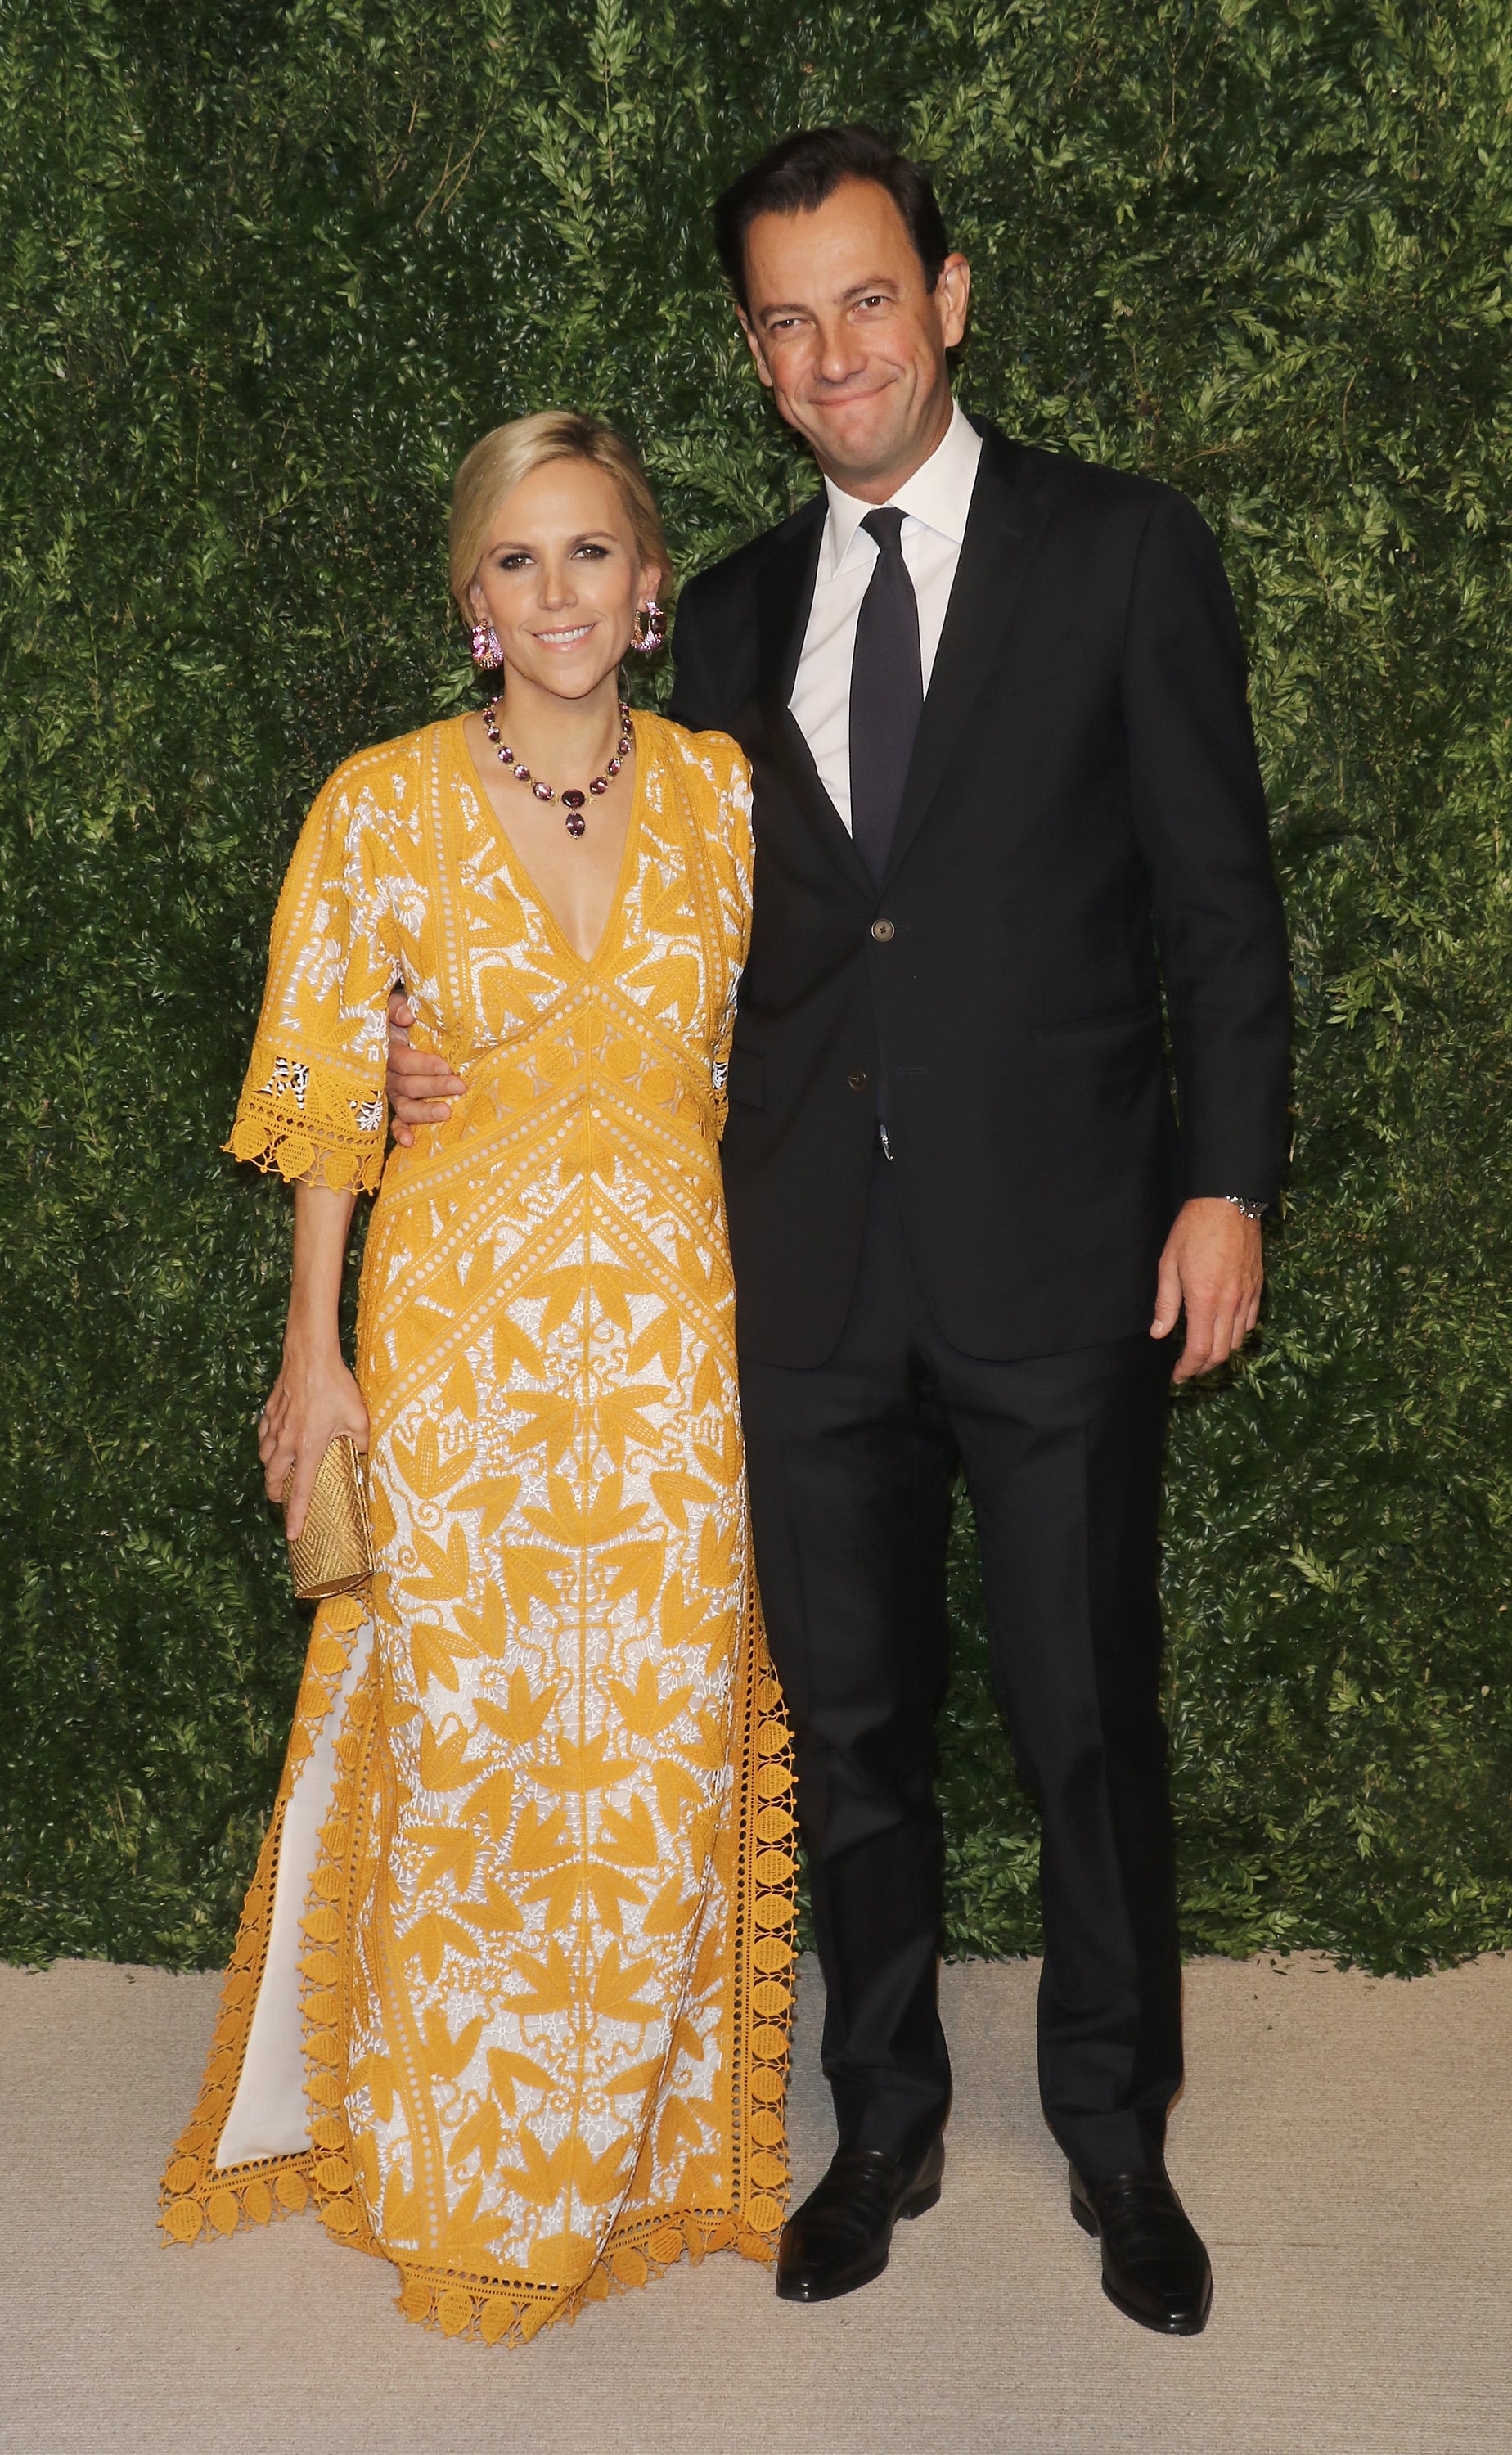 This Holiday Tory Burch Celebrates a New Kind of Family